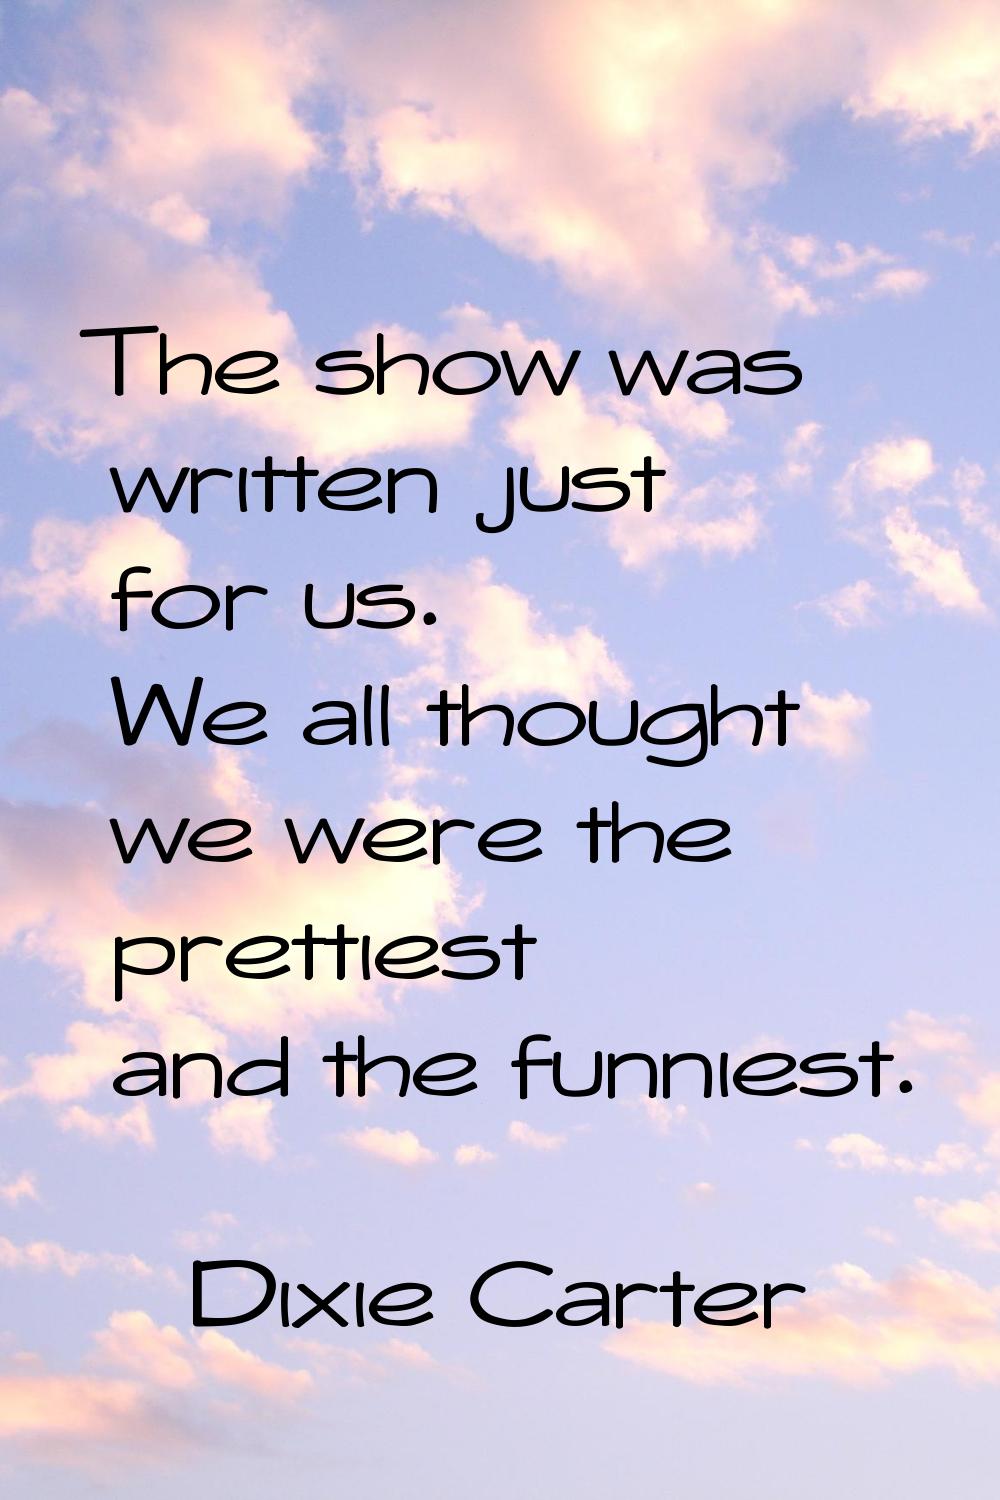 The show was written just for us. We all thought we were the prettiest and the funniest.